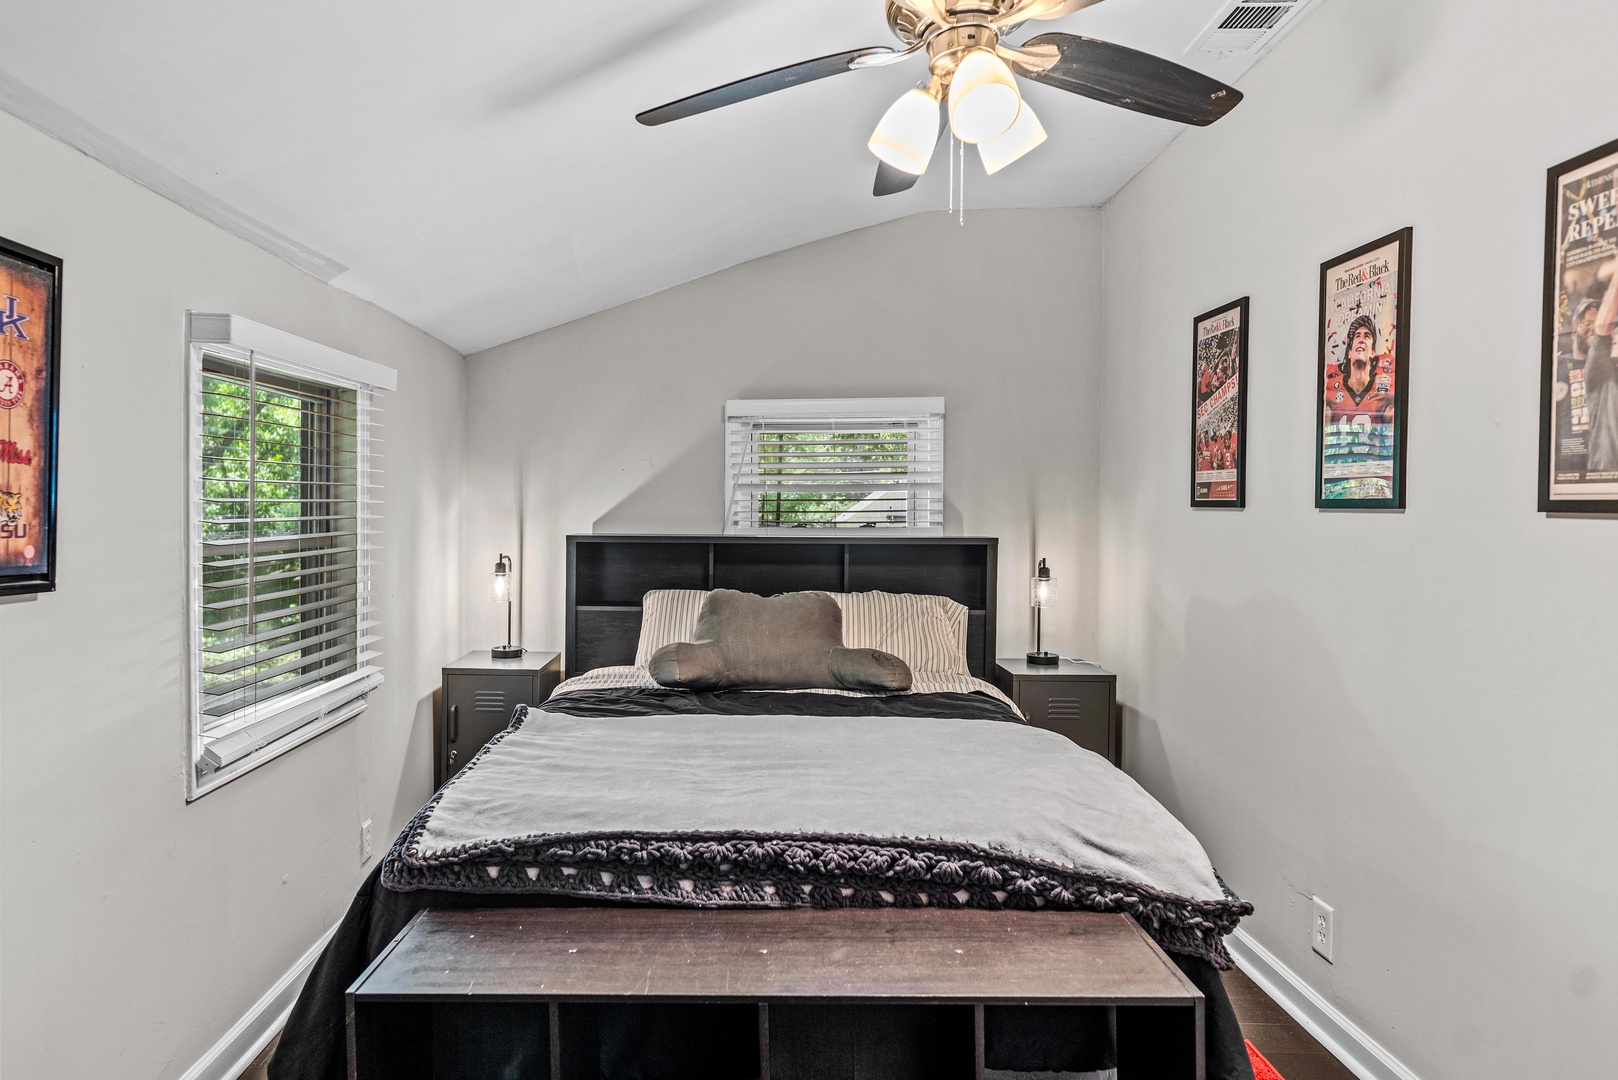 The main bedroom offers a queen-sized bed & ceiling fan